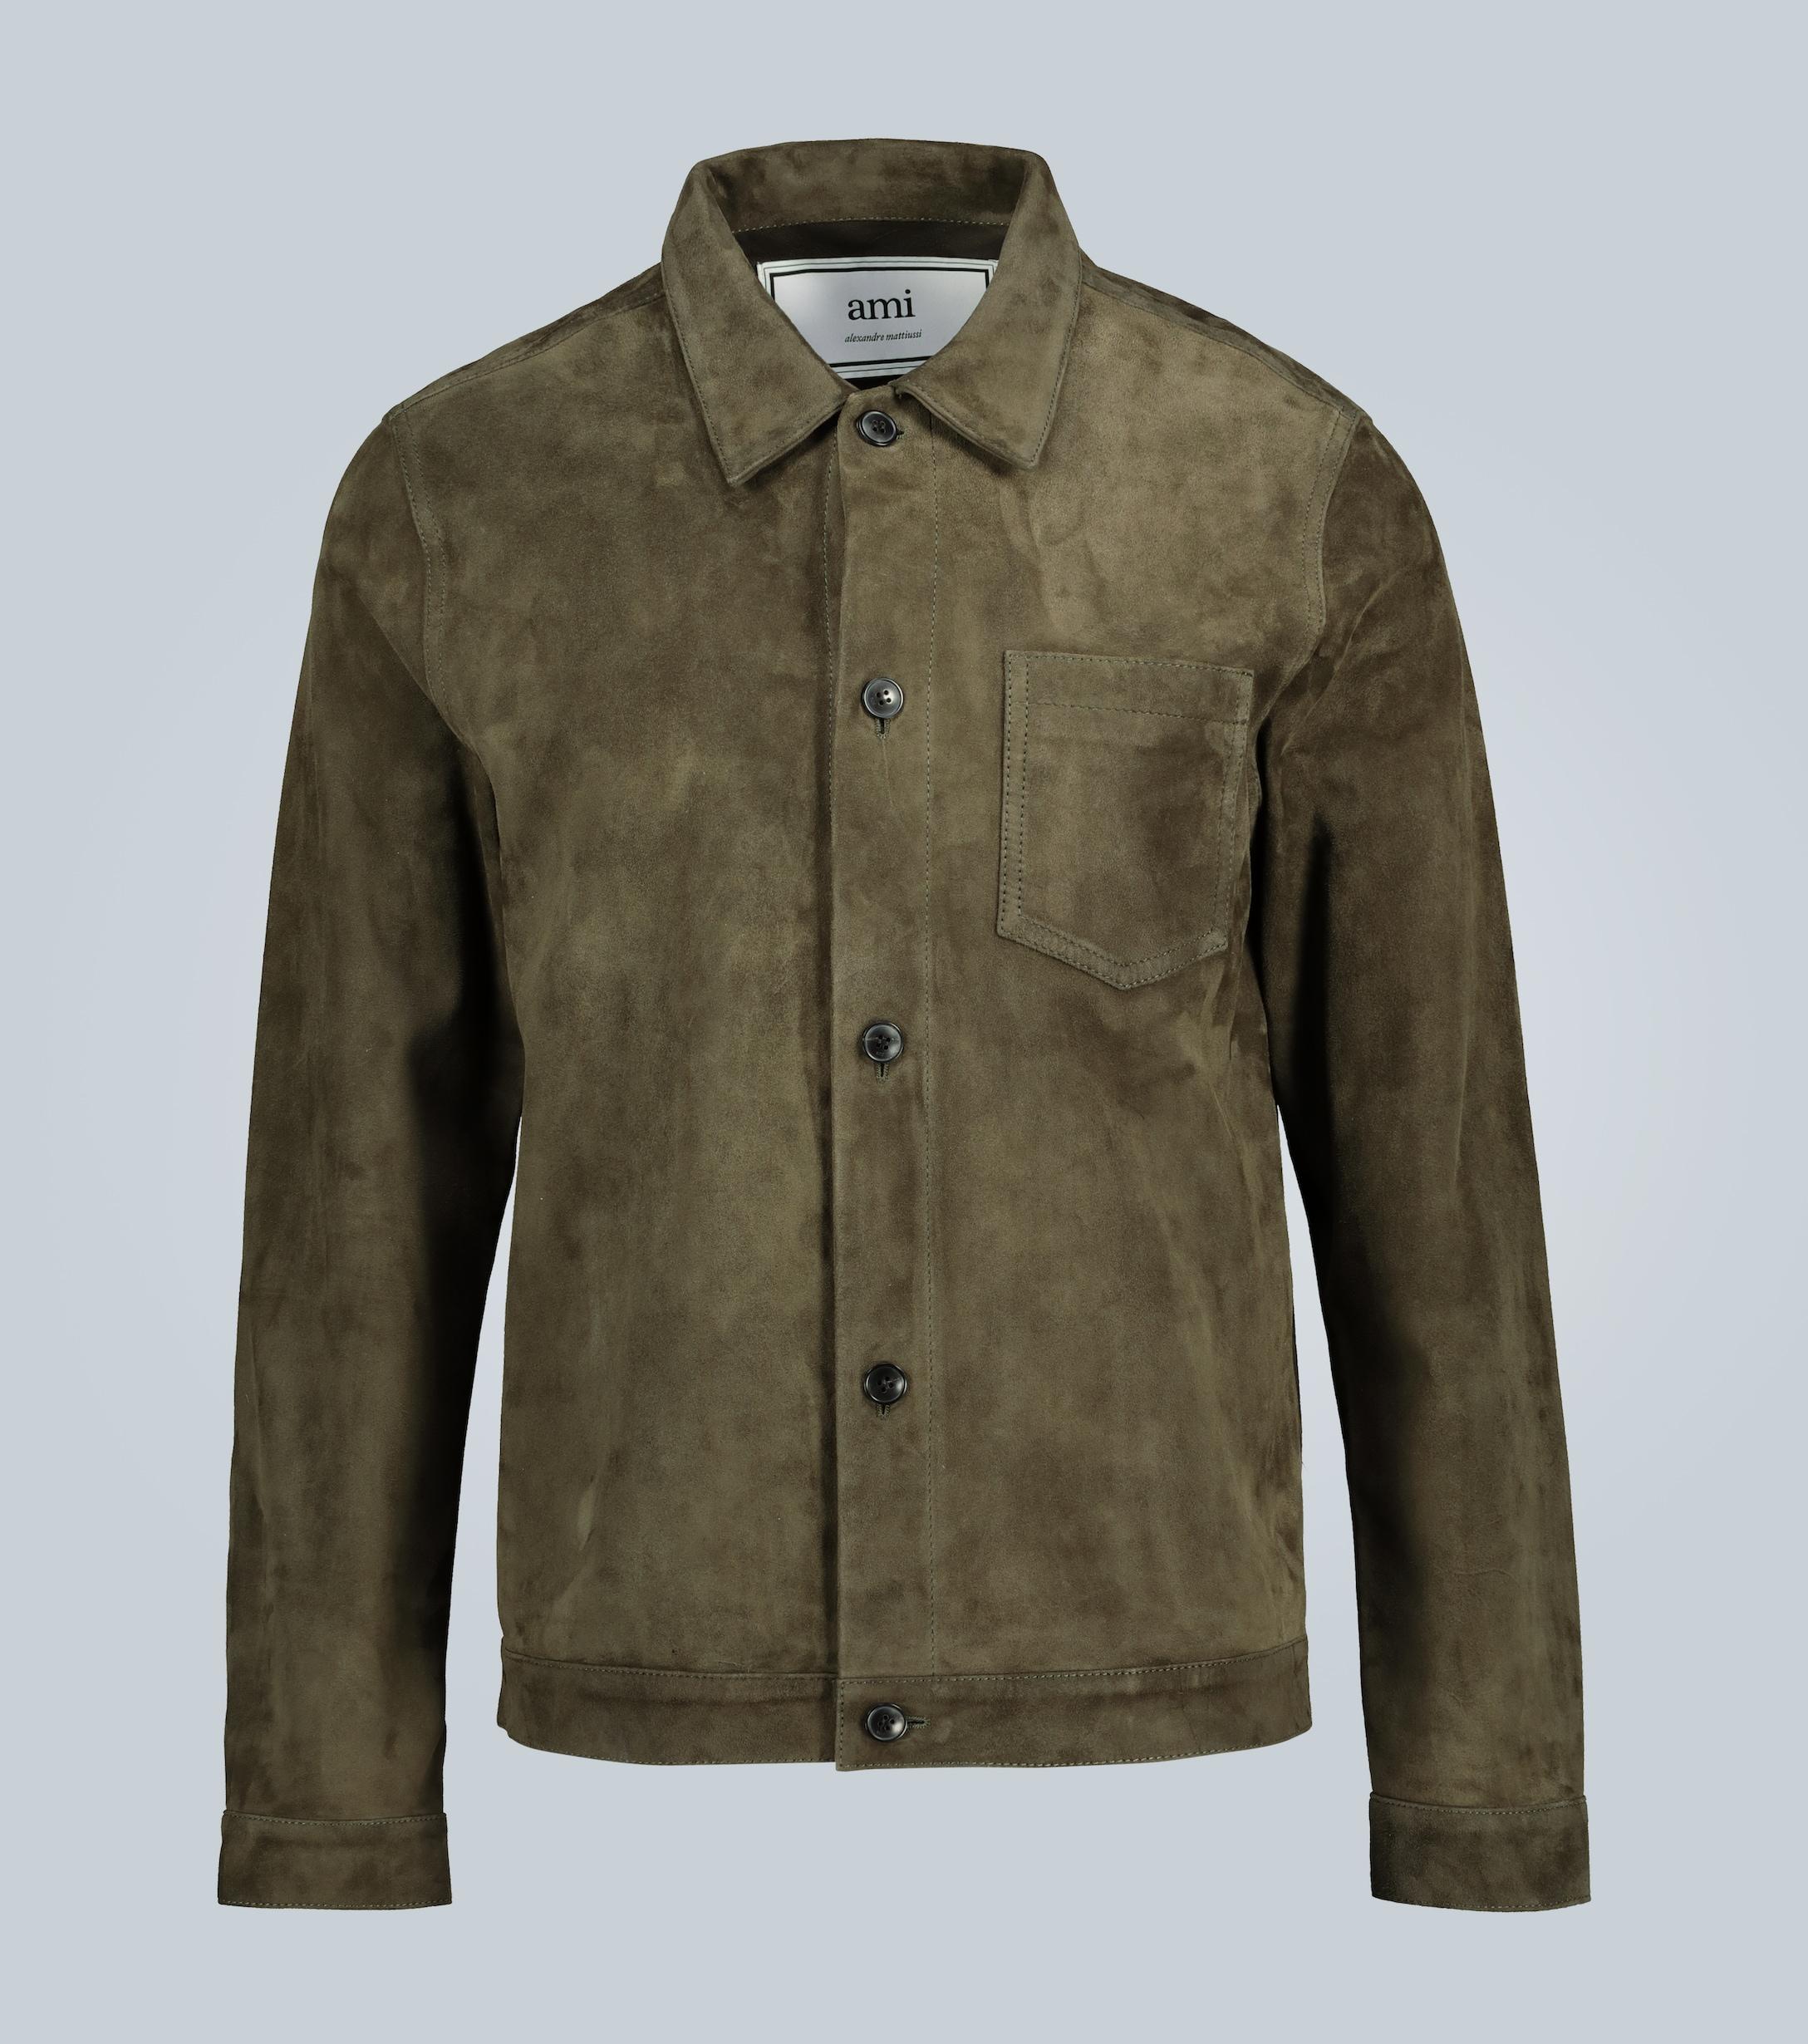 AMI Suede Buttoned Jacket in Green for Men - Lyst